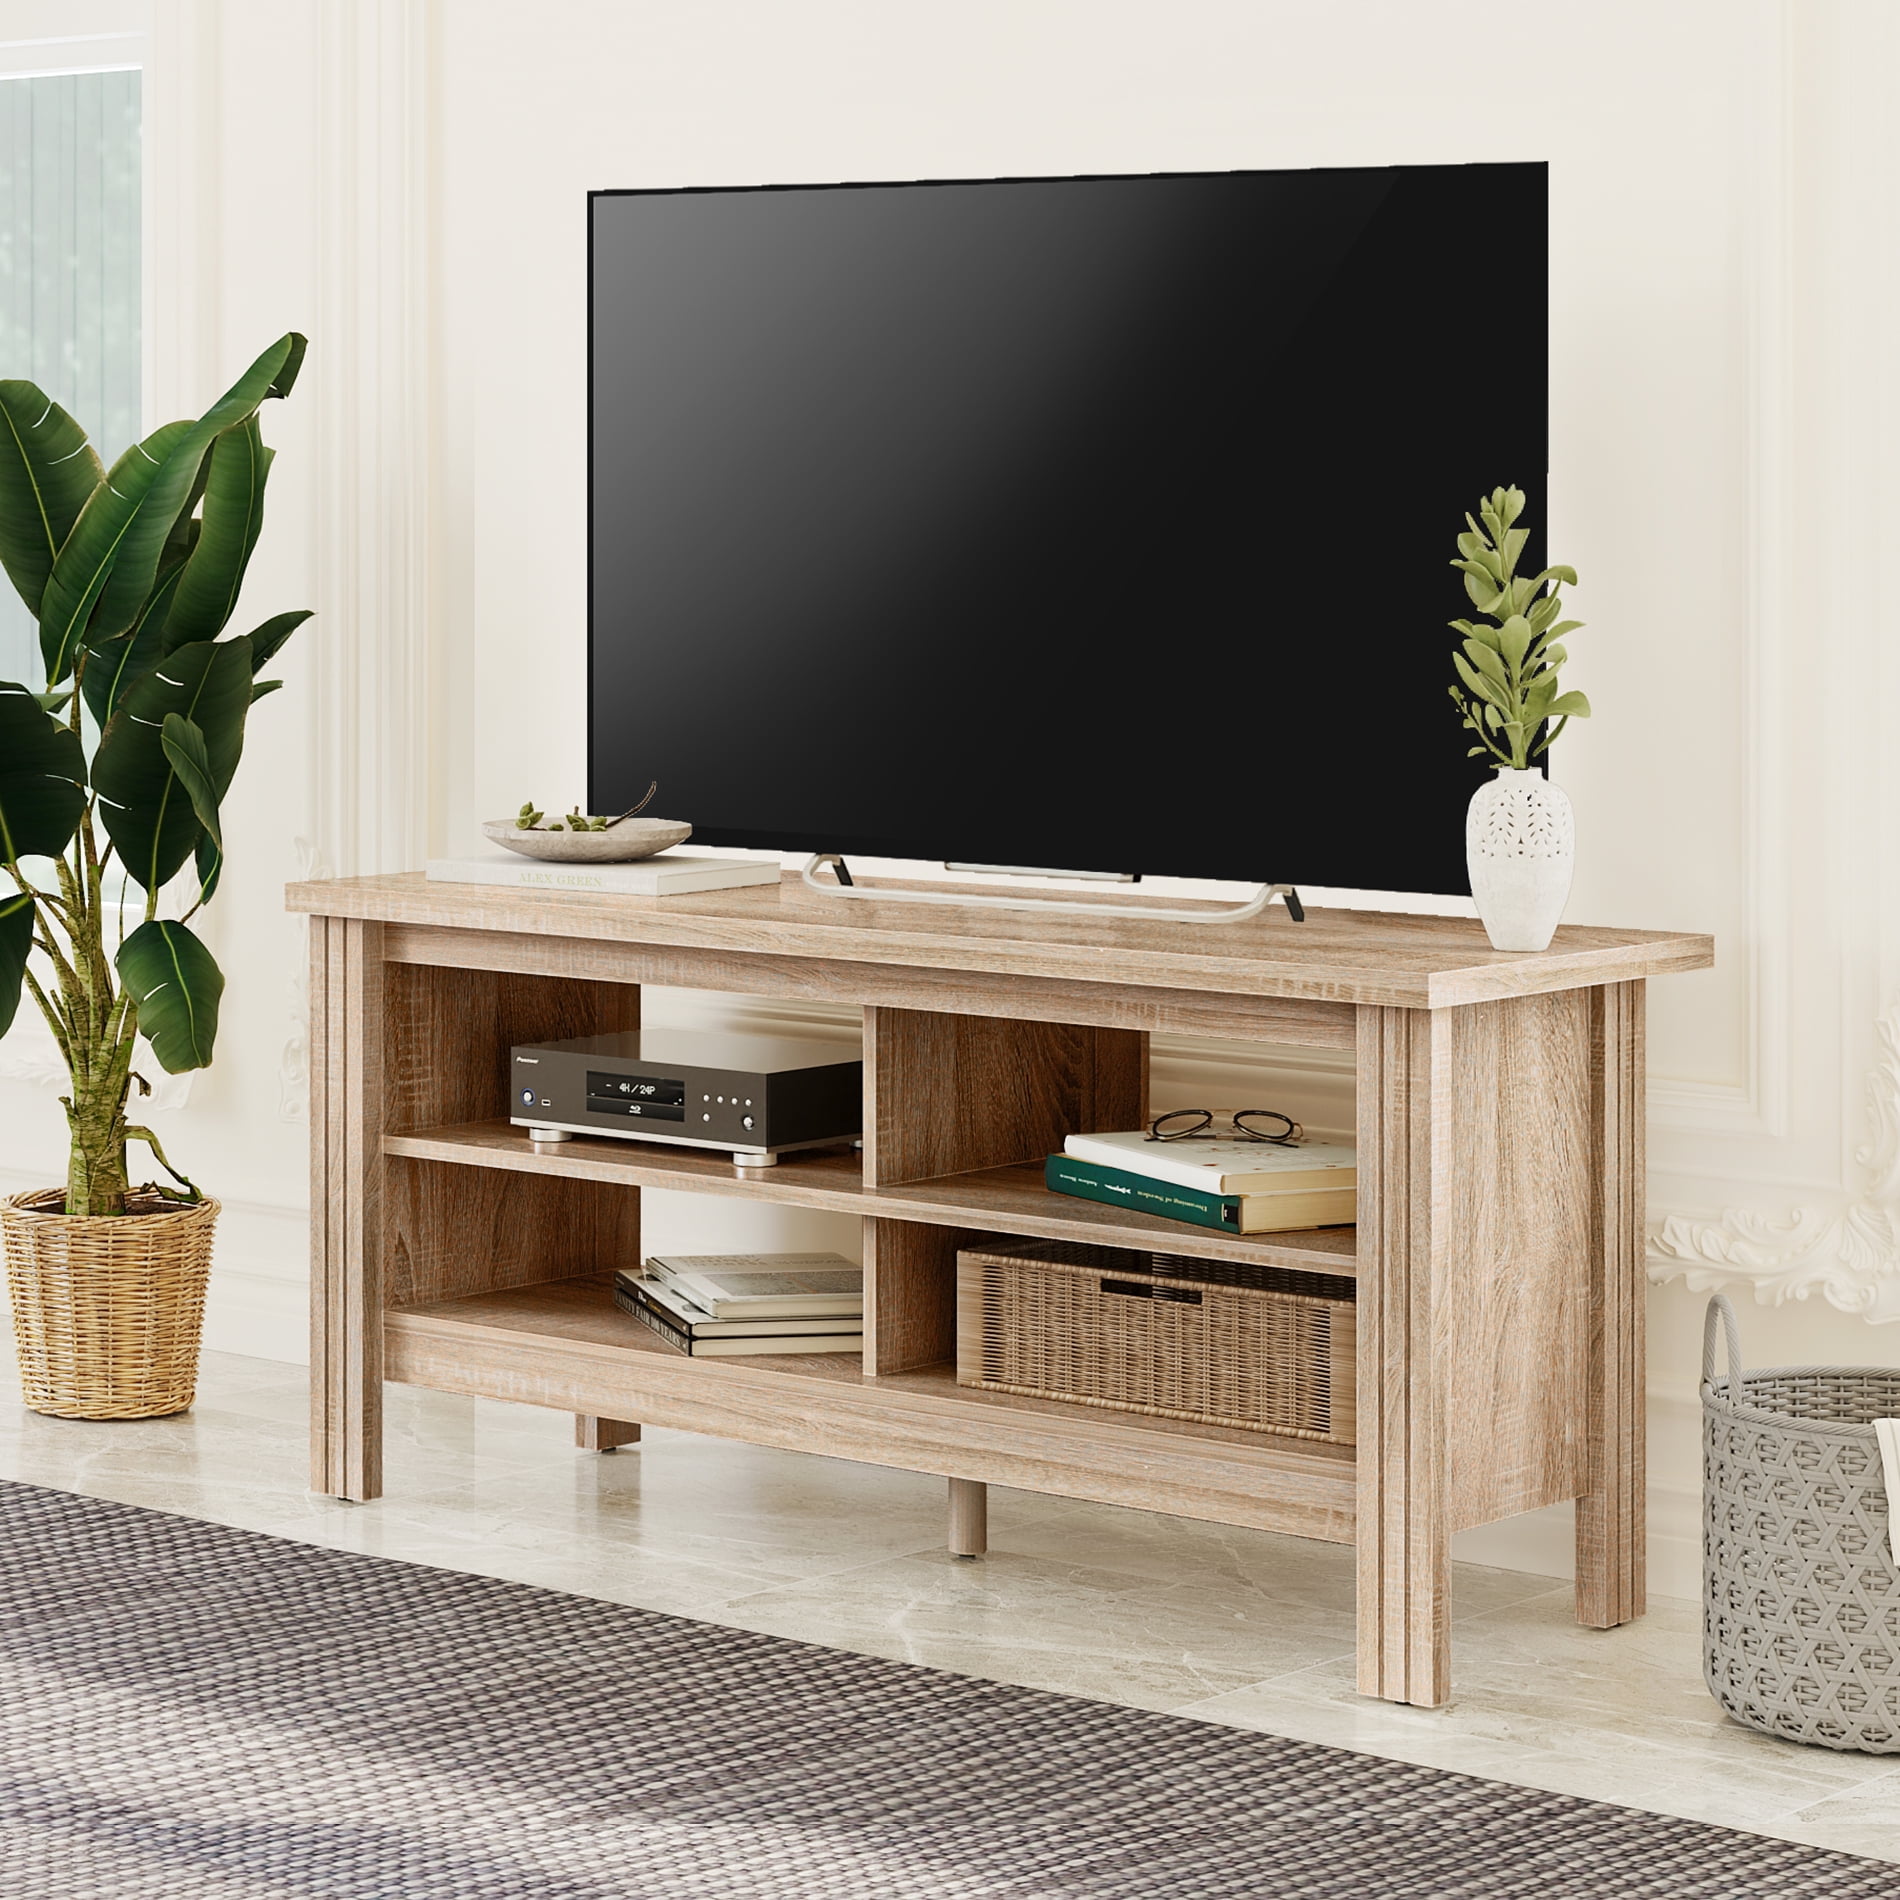 Wampat Farmhouse TV Stand for 50 inch Flat Screen, Living ...